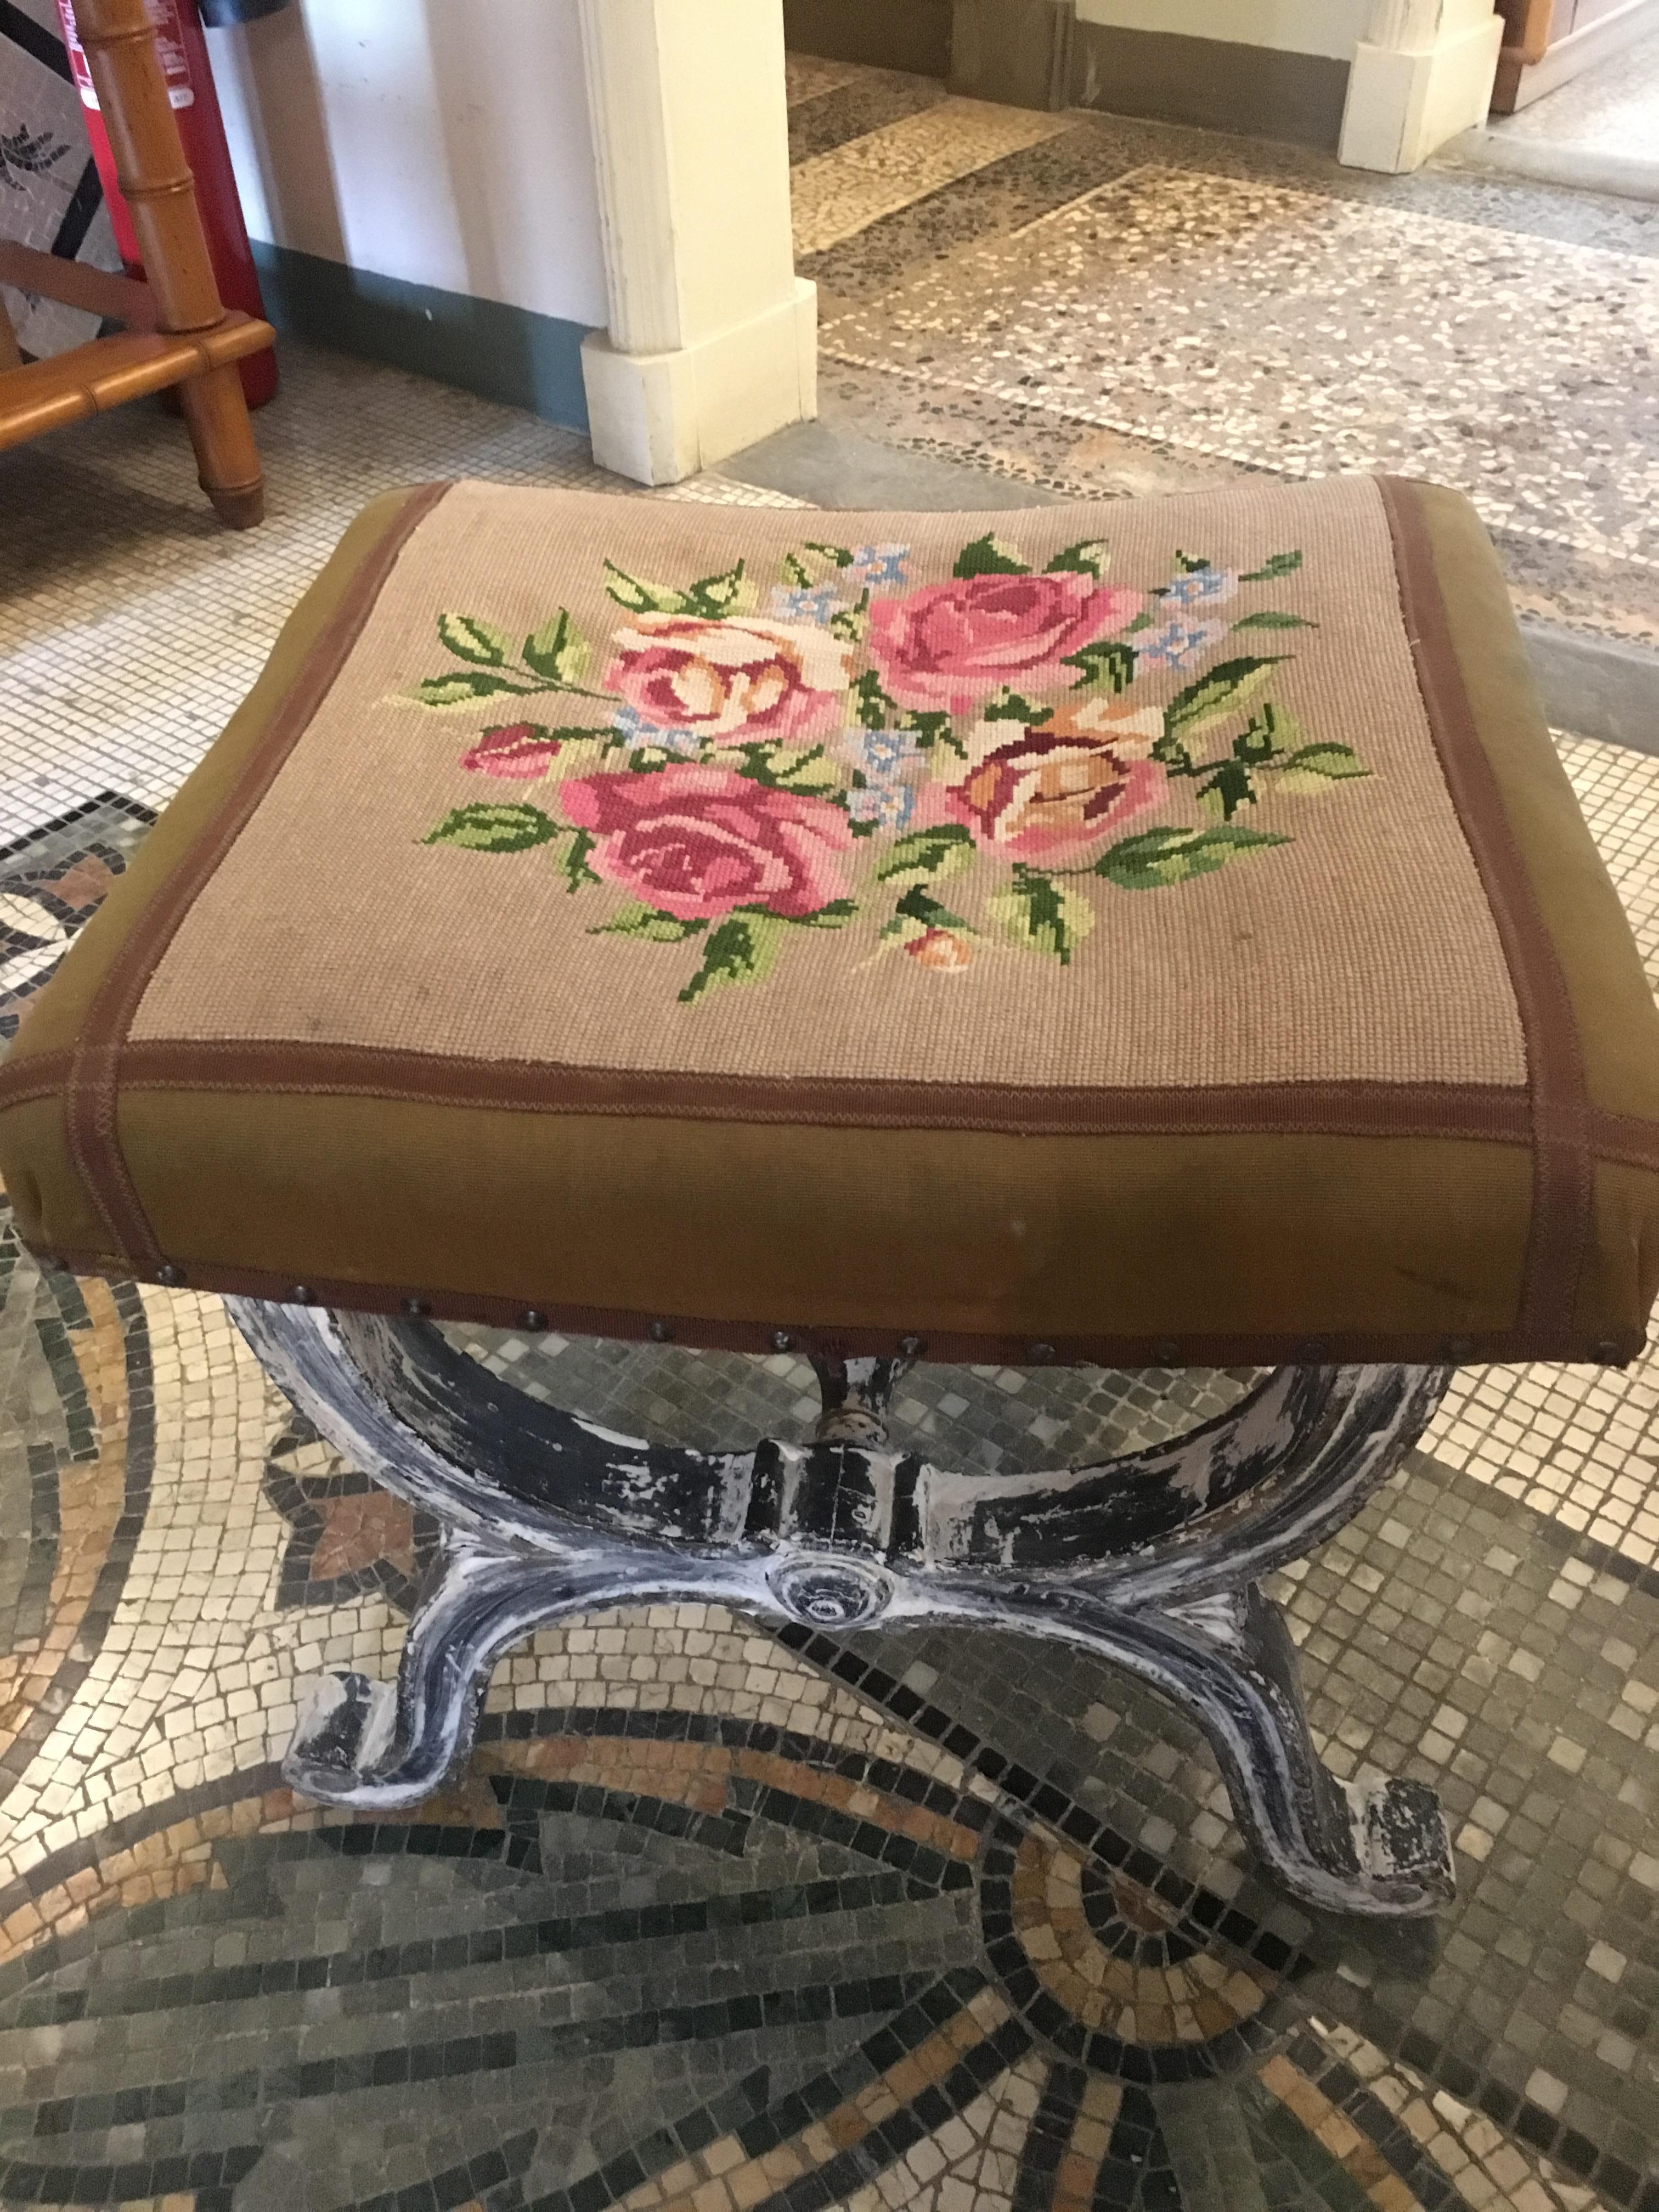 19th Century Italian Lacquered Wooden Stool with Hand Embroidered Seat, 1890s (Italienisch) im Angebot